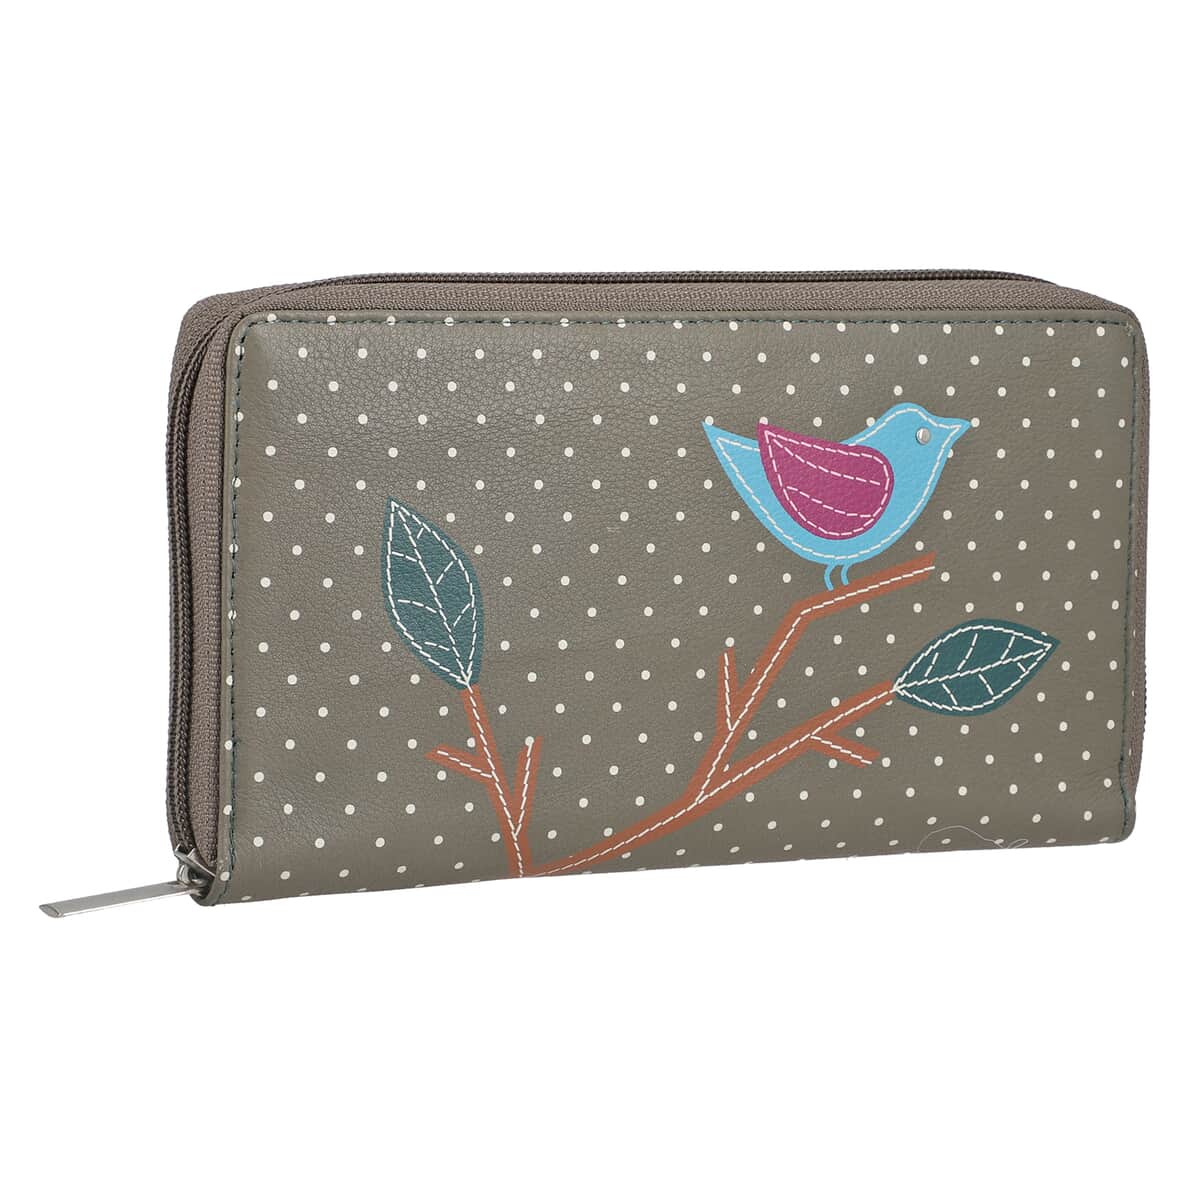 Union Code Gray Color Bird Sitting on Tree Pattern RFID Protected 100% Genuine Leather Applique Women's Wallet image number 6